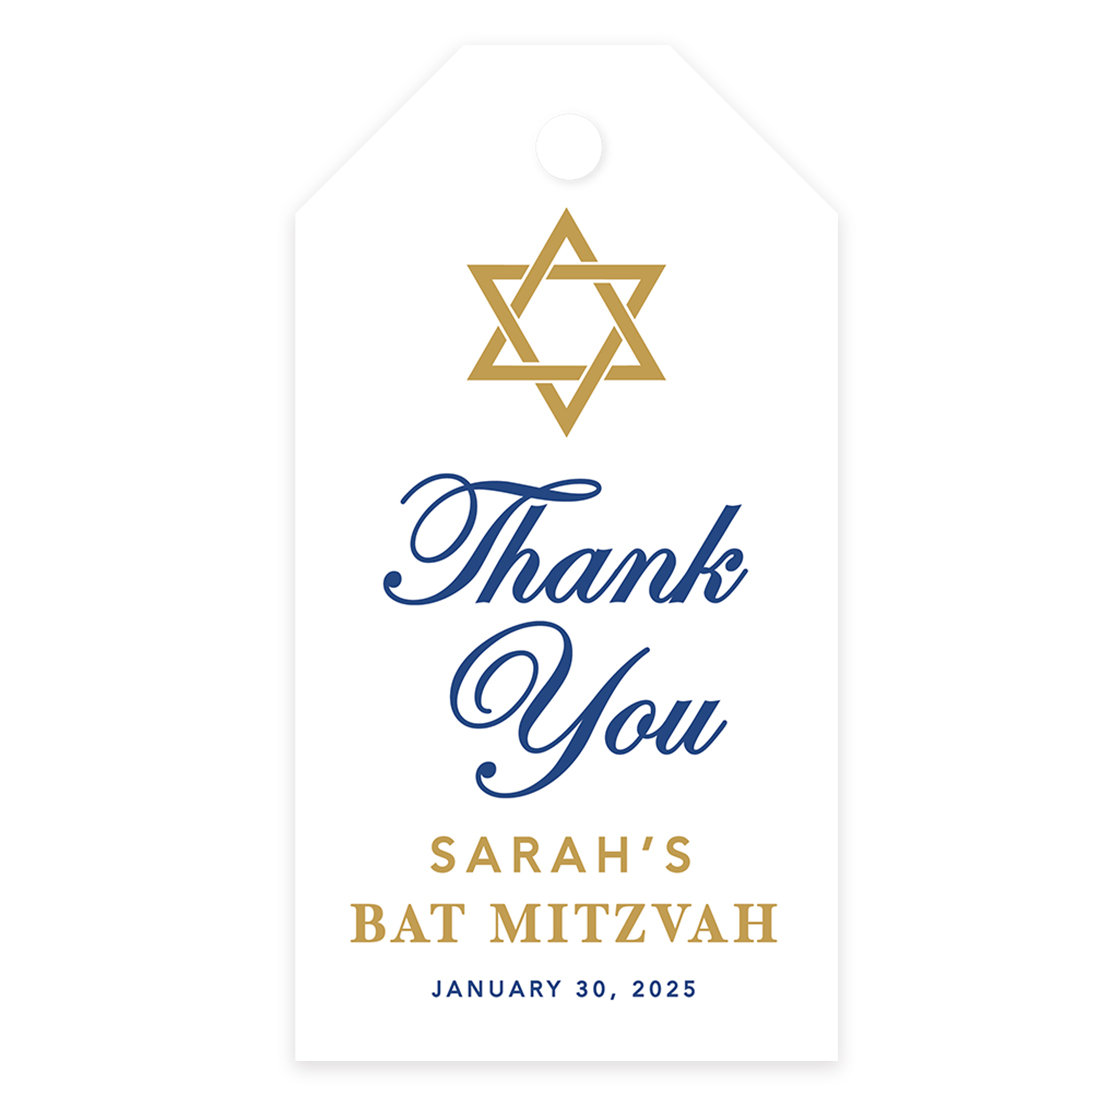 How to Choose an Appropriate Bar or Bat Mitzvah Gift: 9 Steps